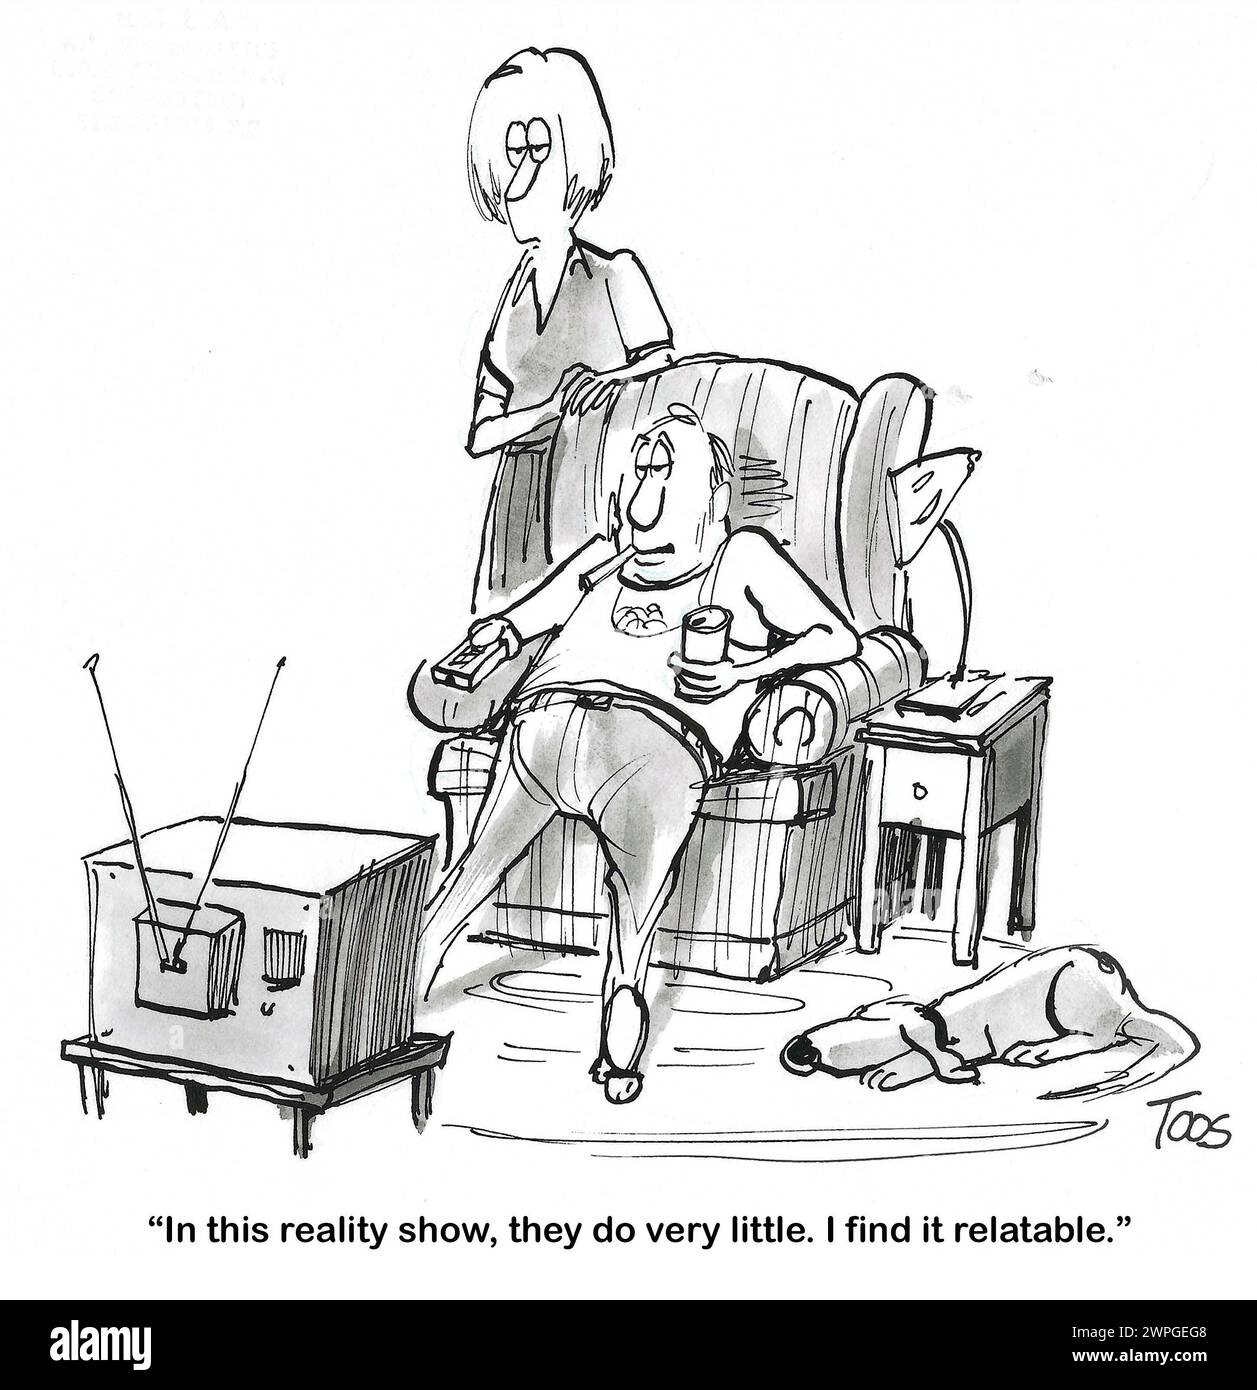 BW cartoon showing a very lazy man.  He finds the tv reality show relatable to his life. Stock Photo